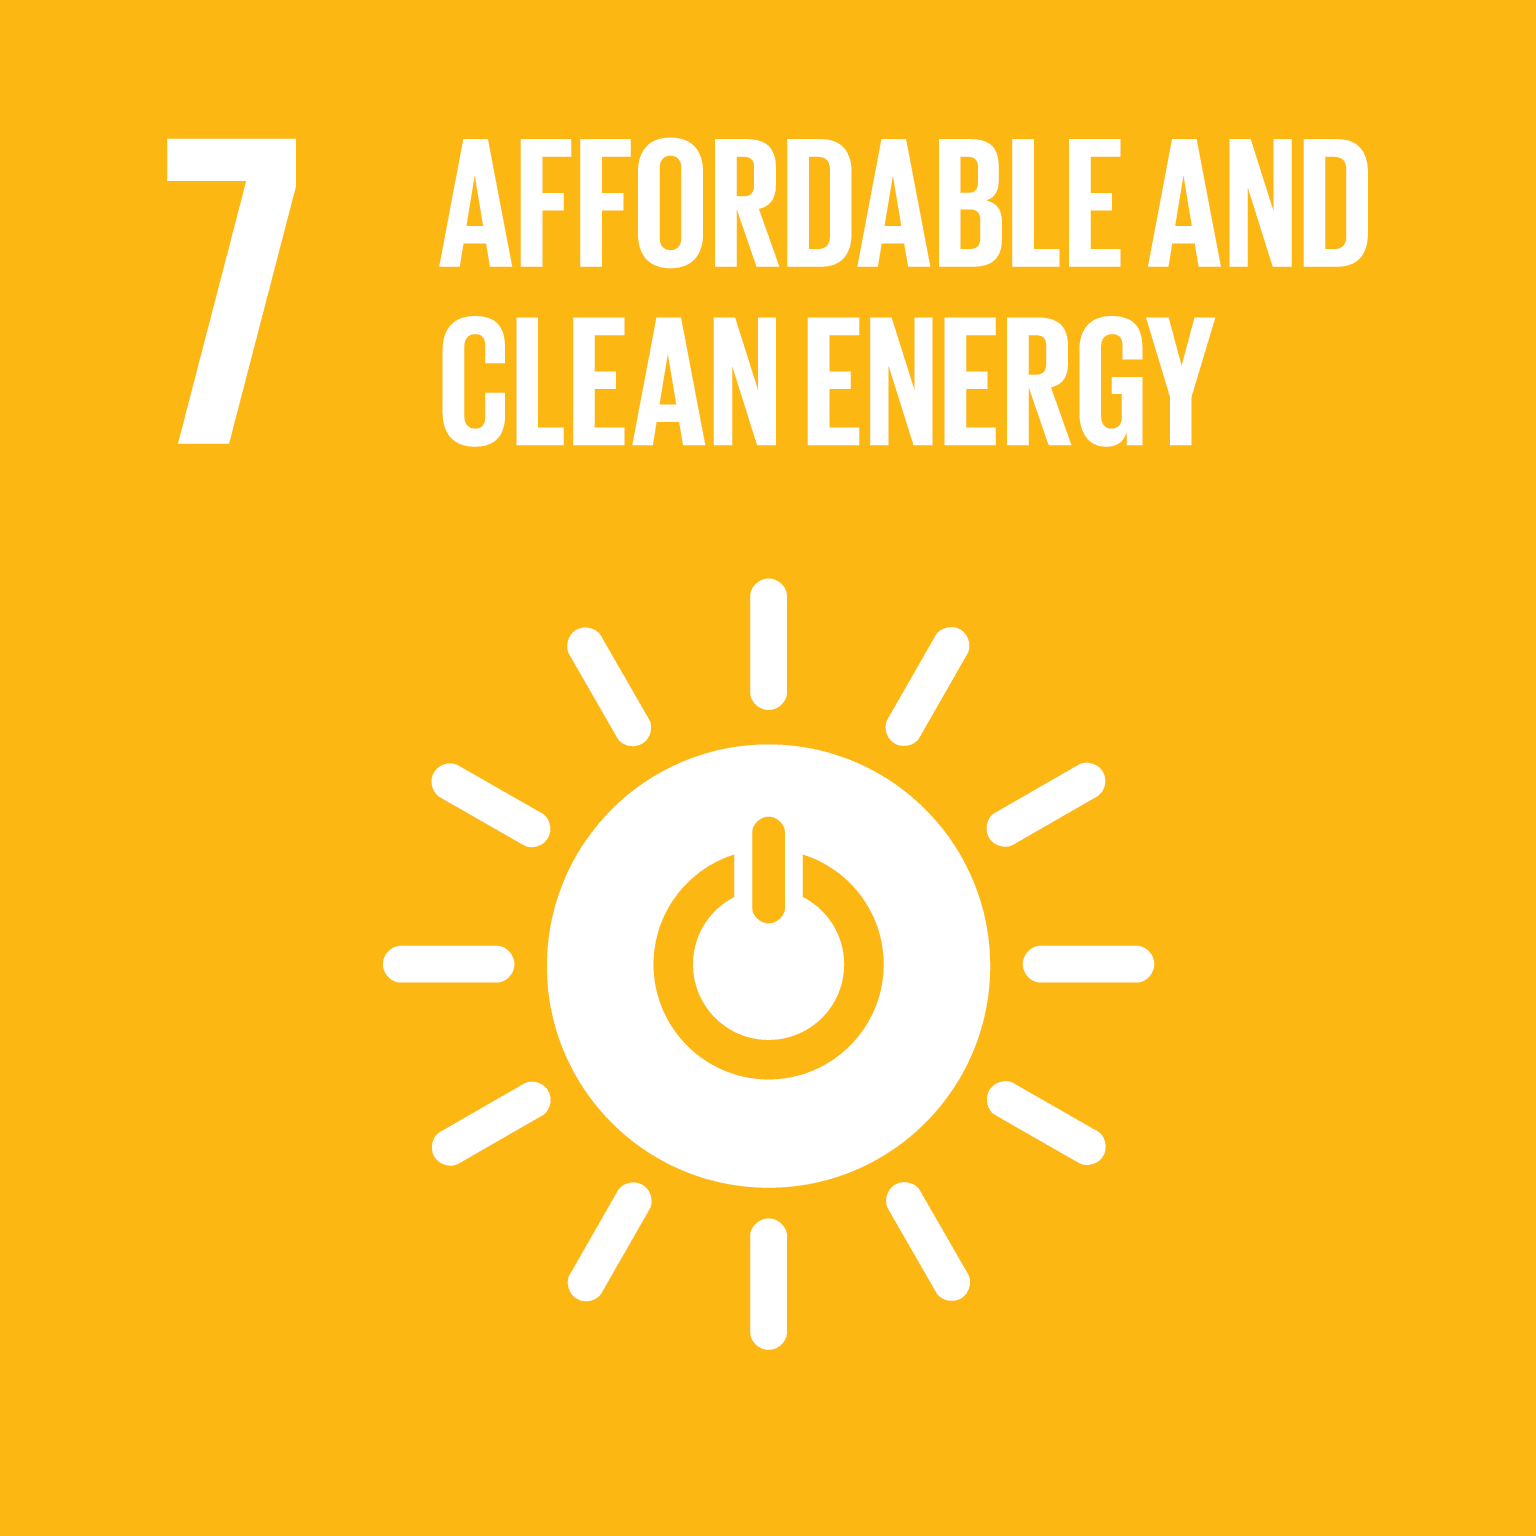 Clean Affordable Energy Key to Ending Extreme Poverty and Securing Global Peace and Equality Says Study